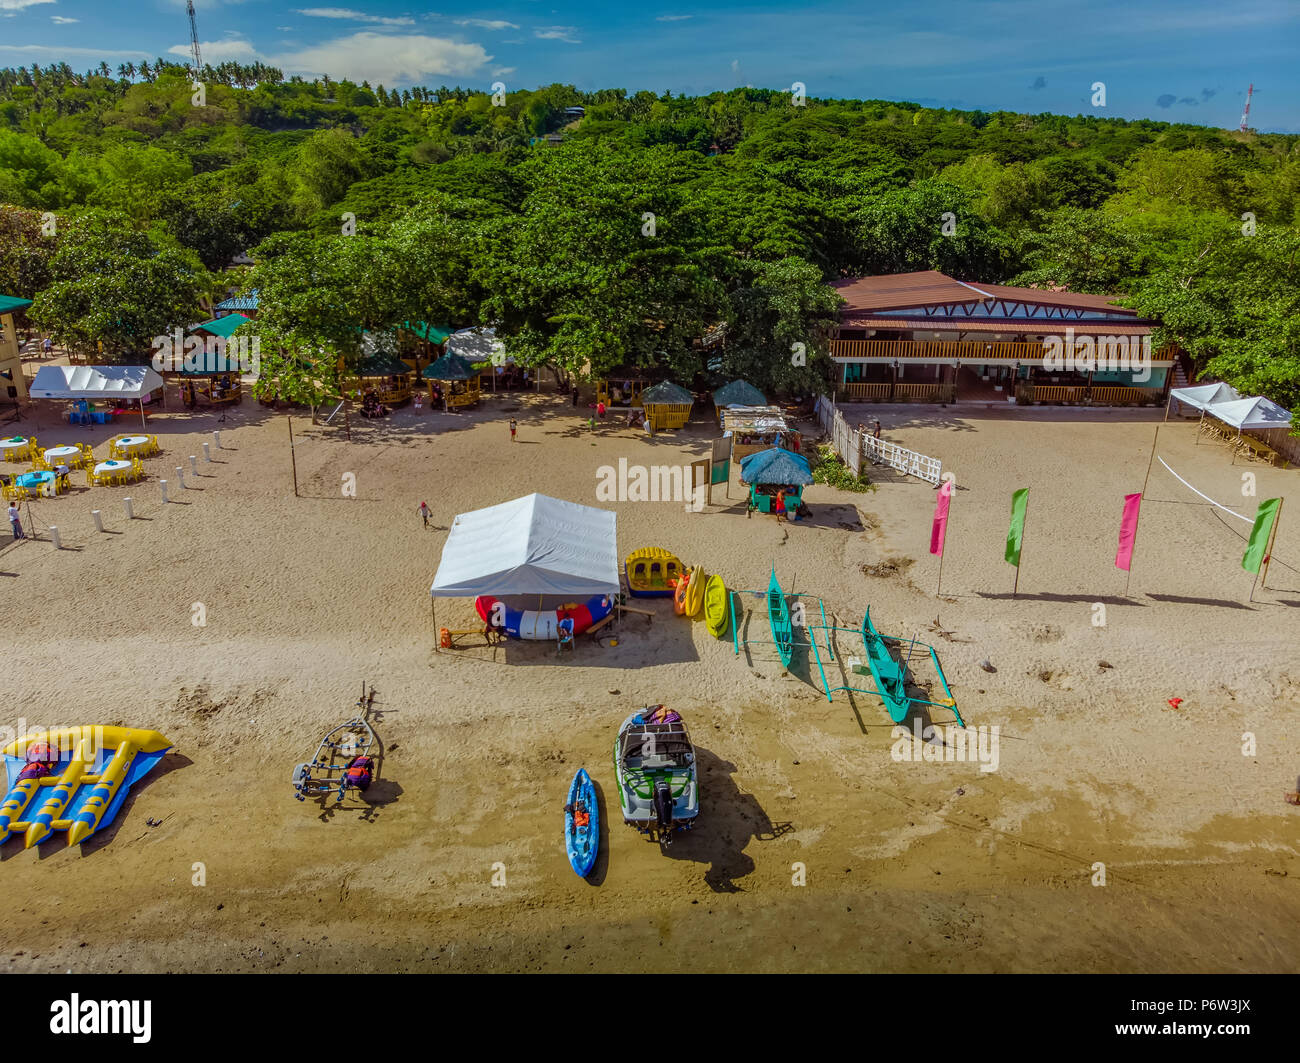 Afternoon aerial view of a beach in Laiya, Batangas with the recreational boats parked in front Stock Photo